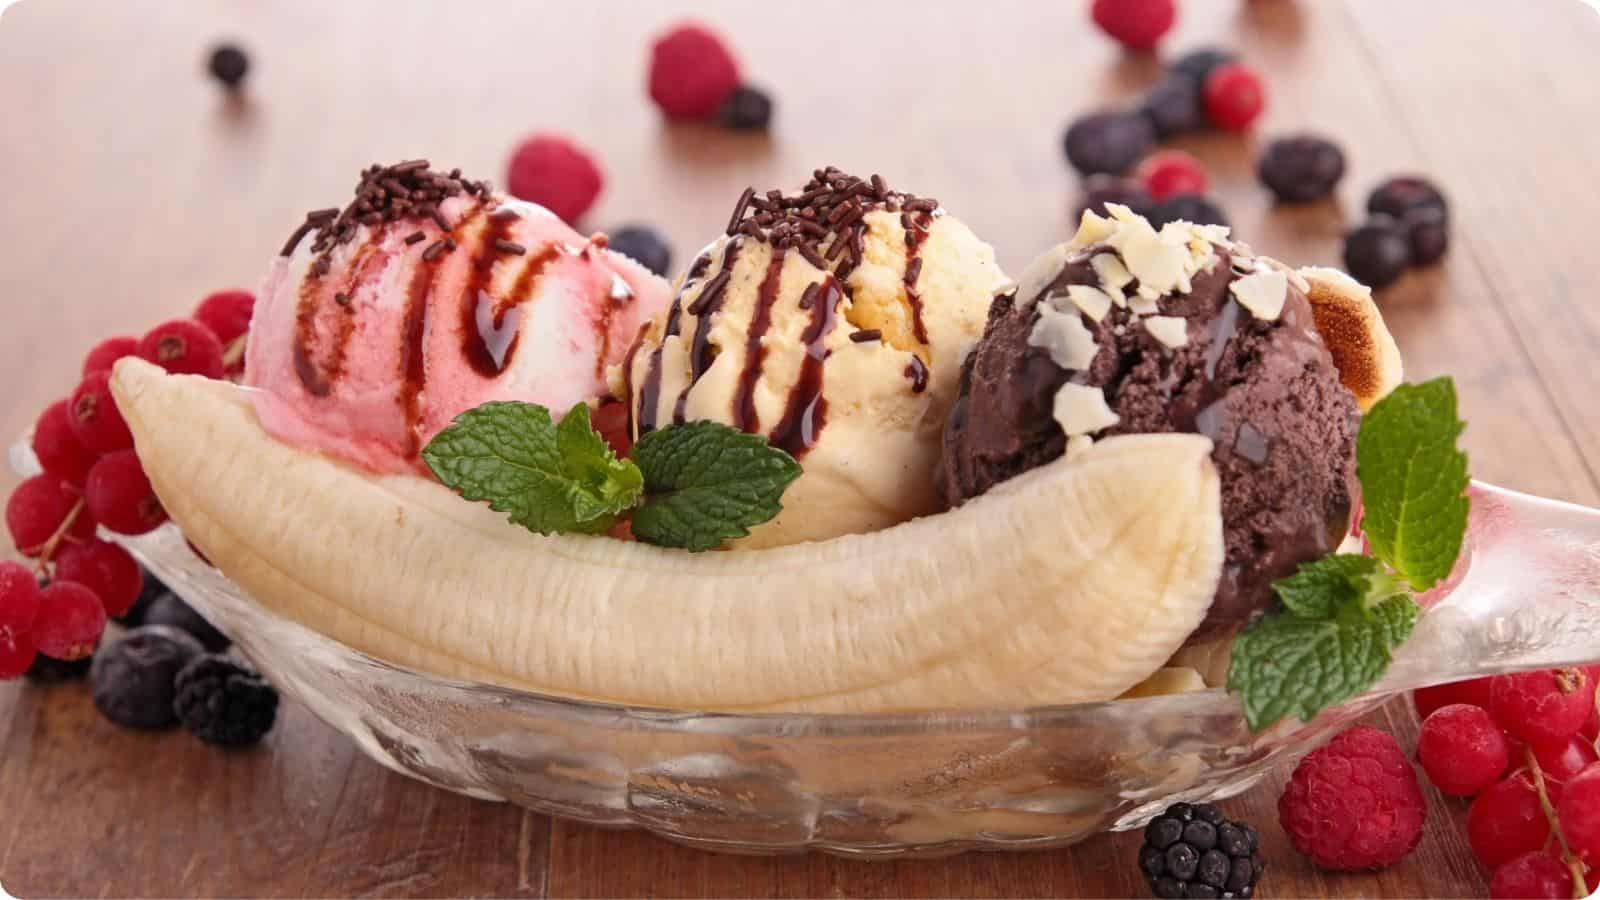 Fresh banana split serve in a fruit oval shaped bowl on a wooden table.